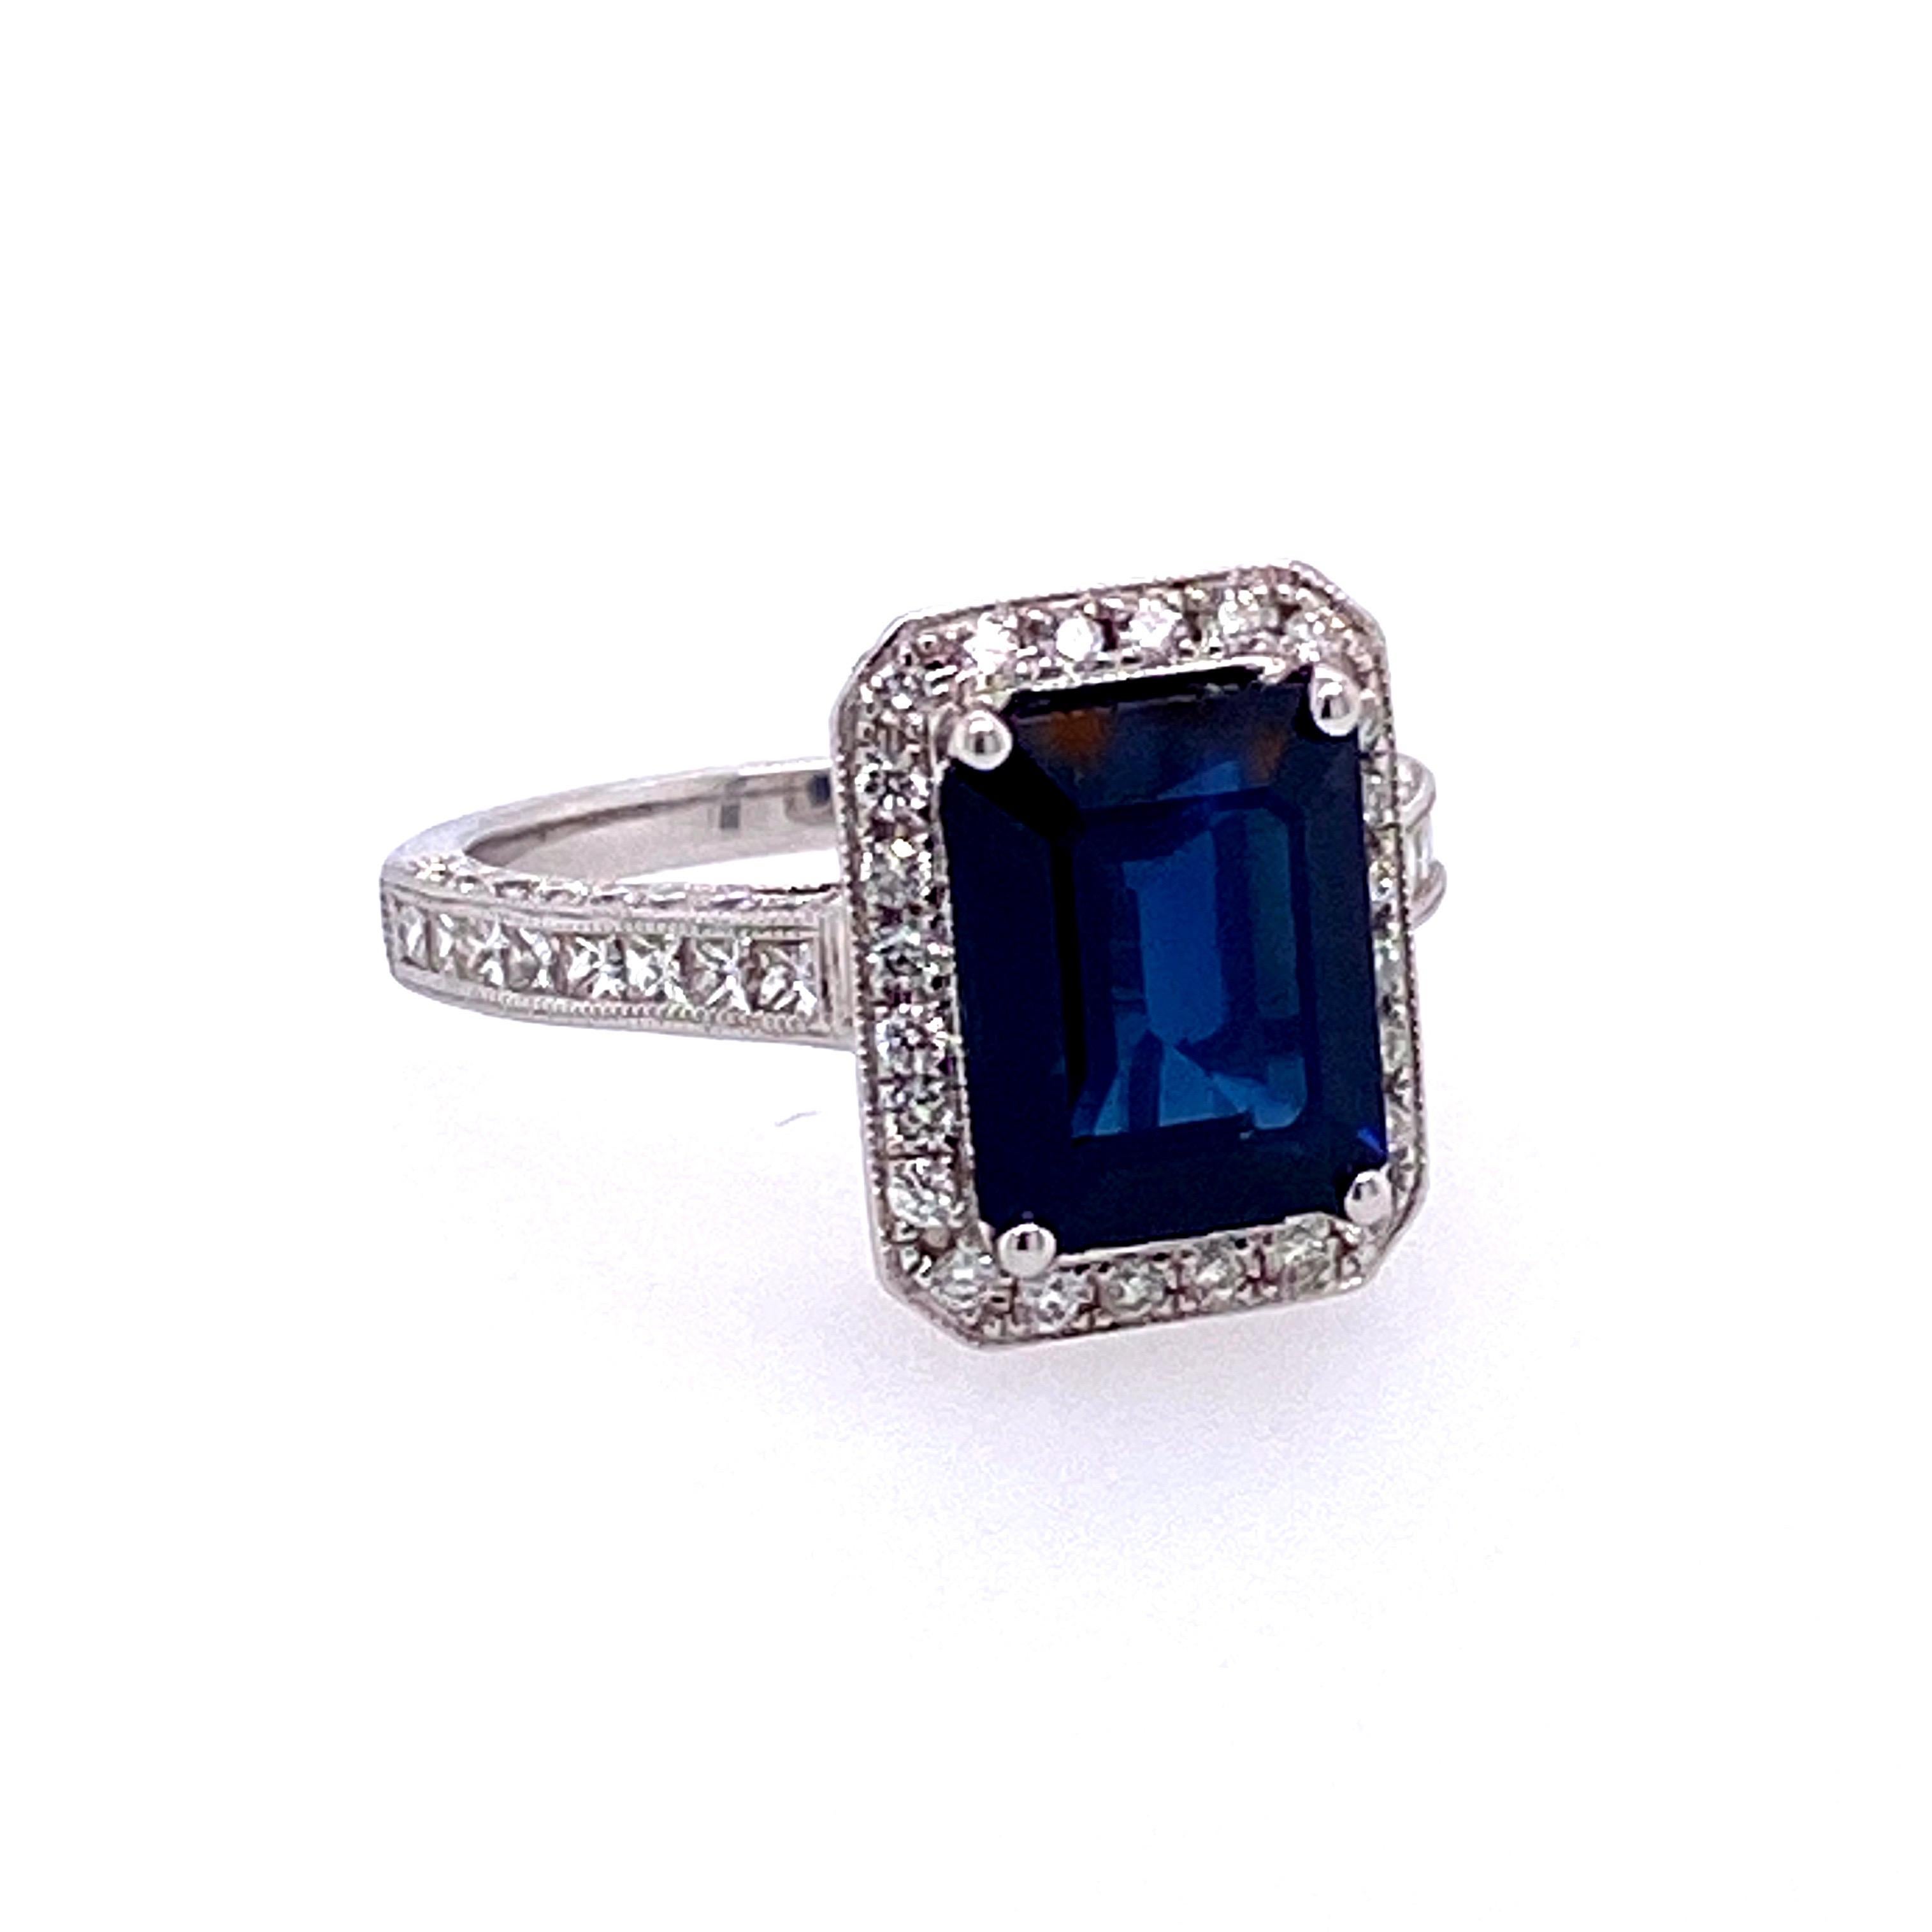 3.97 Carat Emerald Cut Sapphire and Diamond Ring In New Condition For Sale In Great Neck, NY